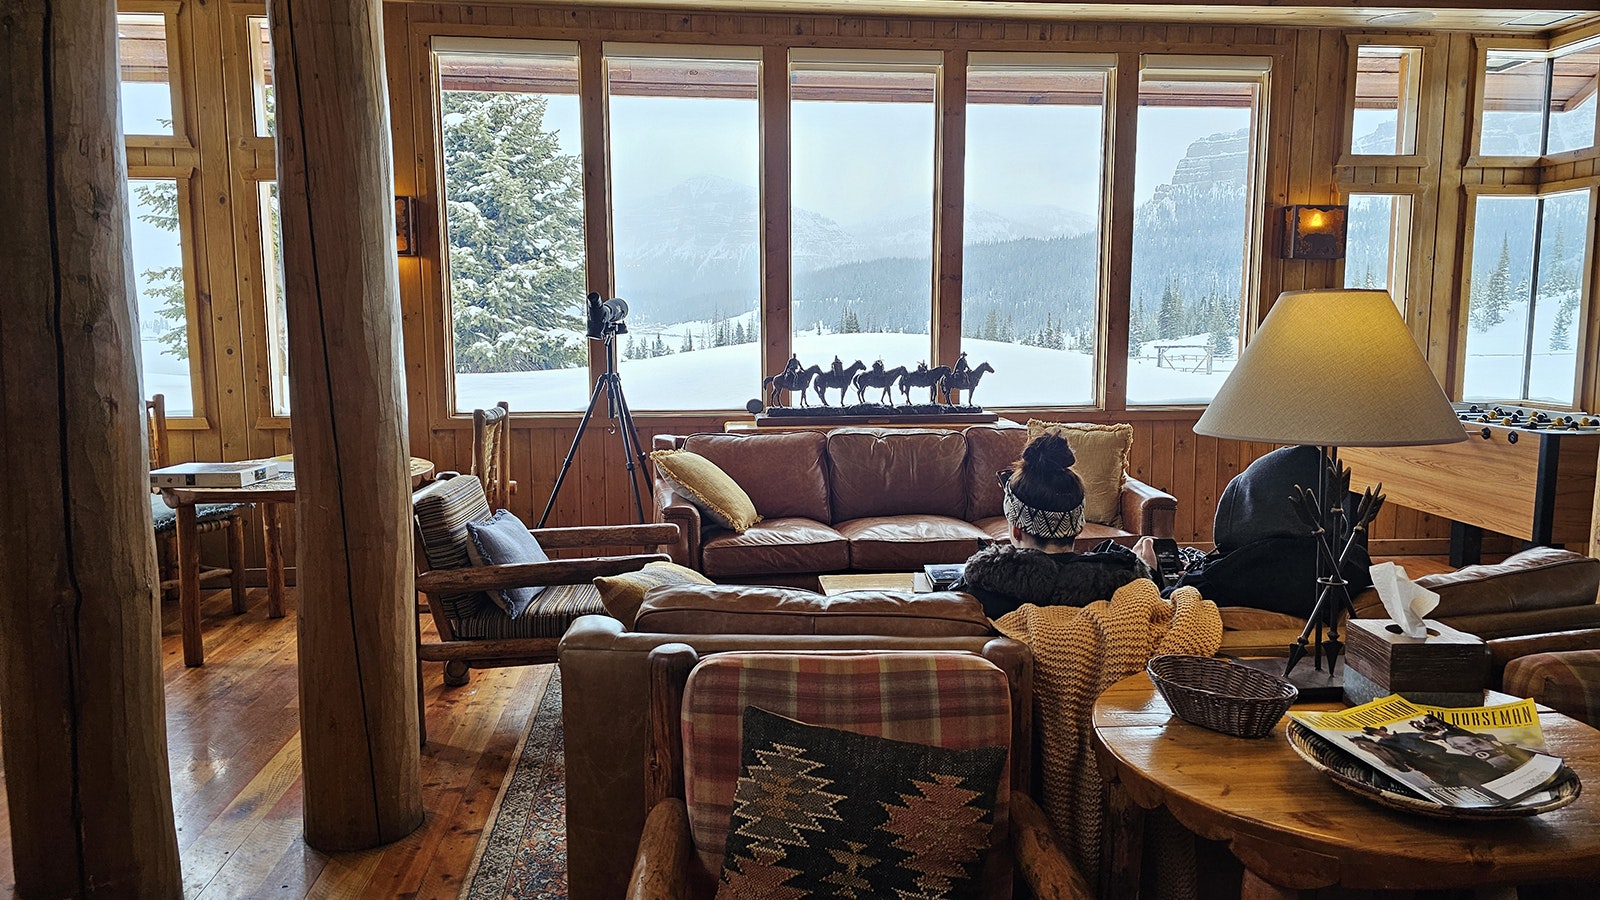 The lodge has many cozy nooks to sit and look outside at the view.